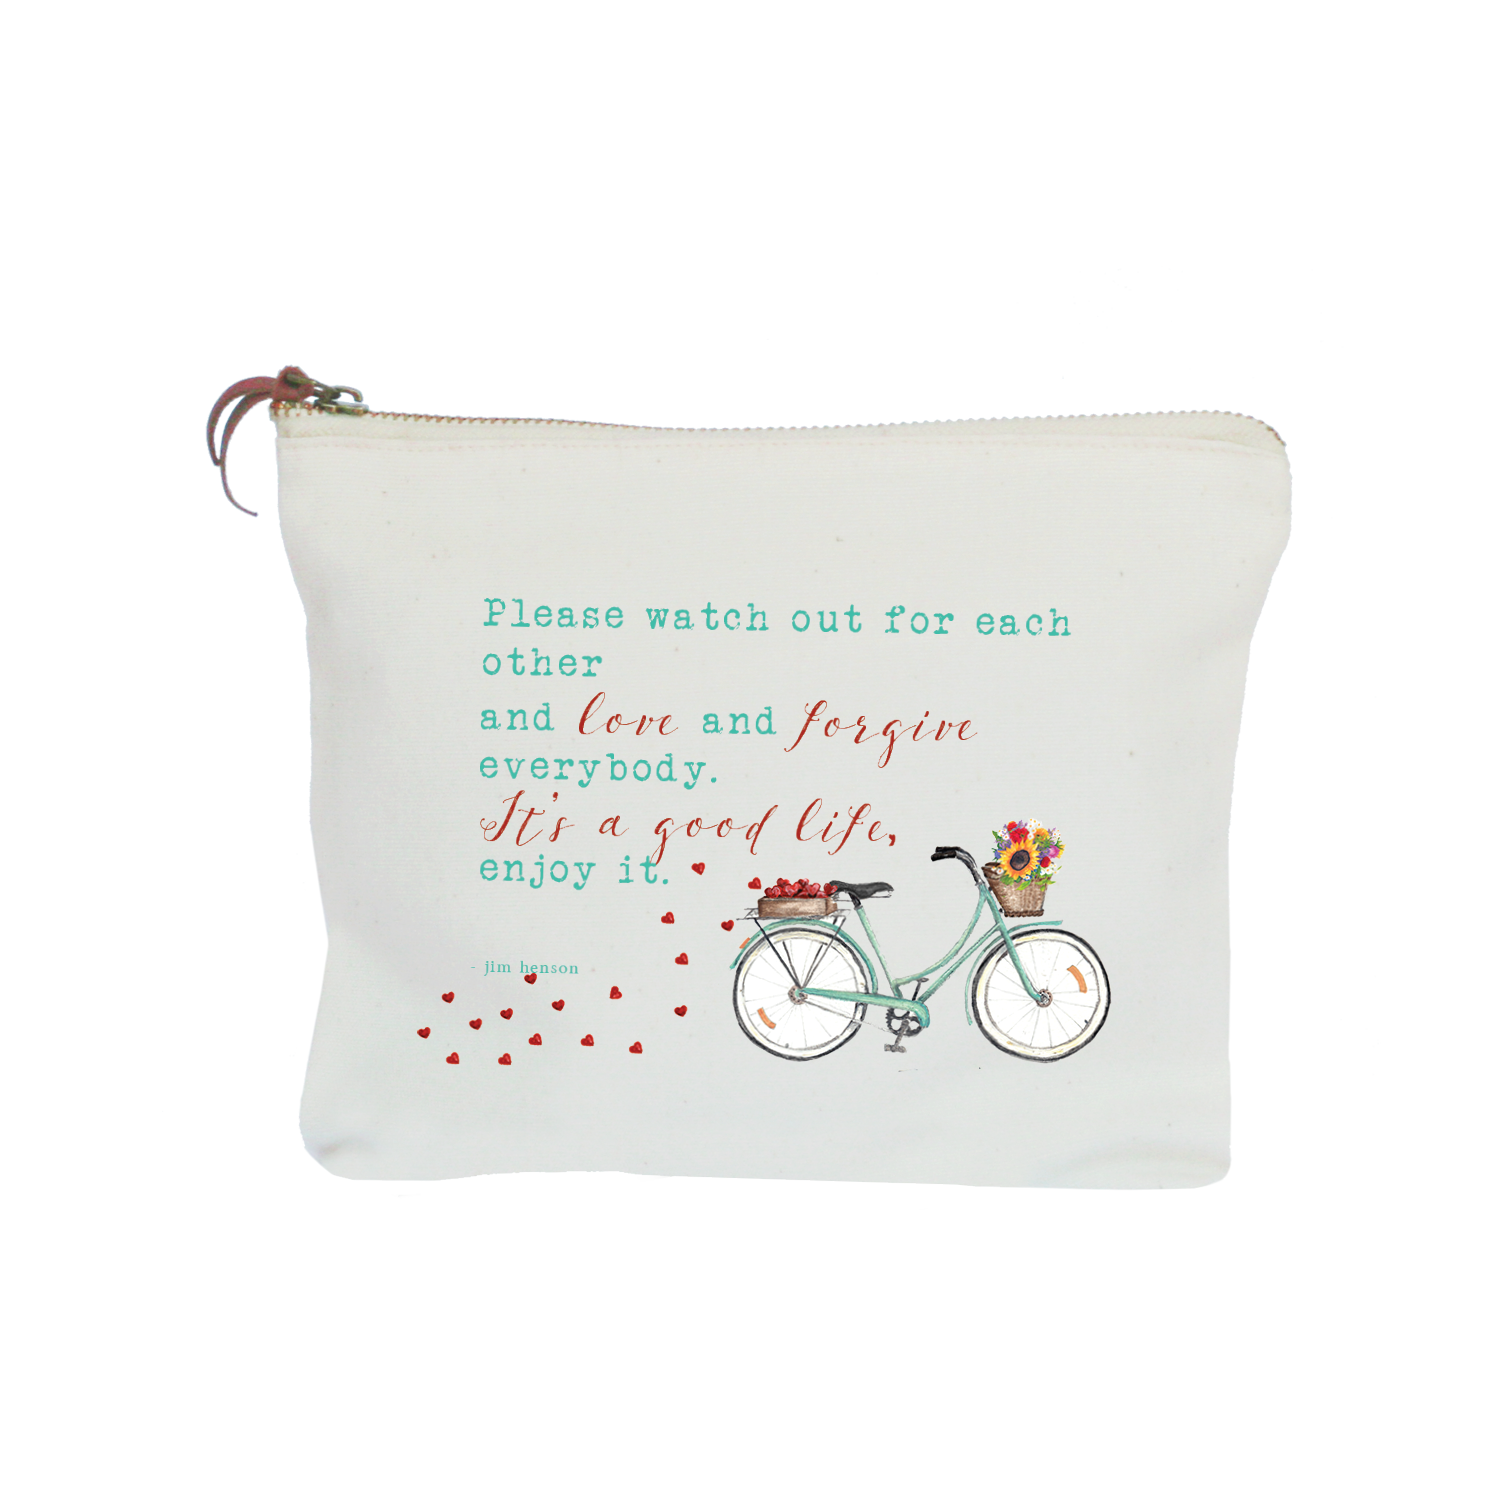 wildflower bike with jim henson quote zipper pouch